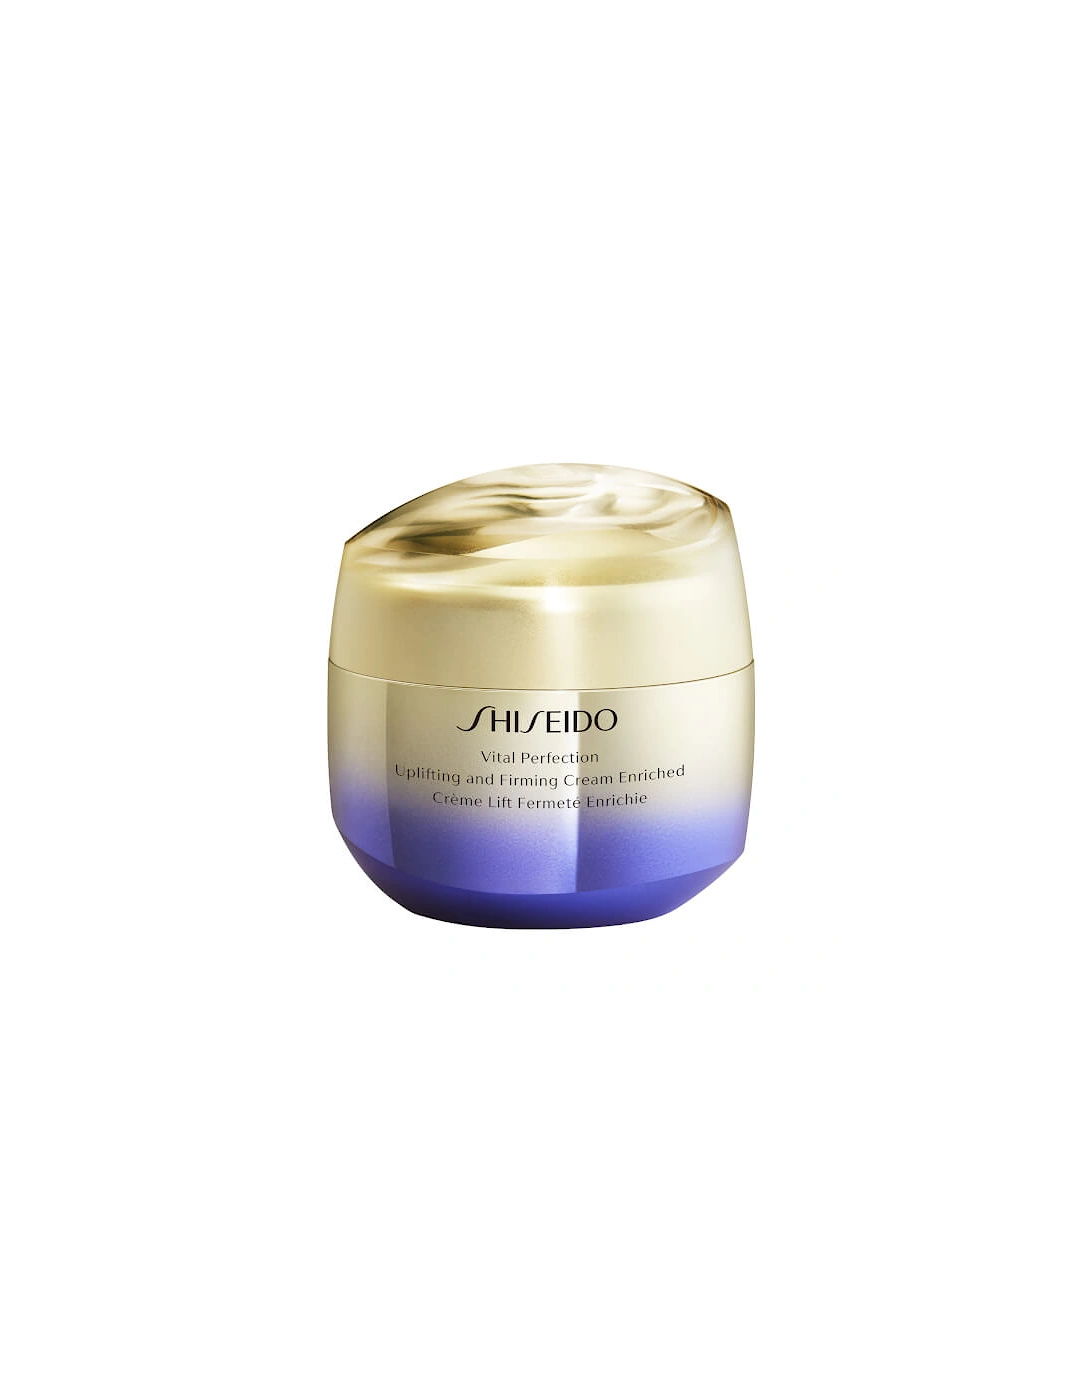 Vital Perfection Uplifting and Firming Enriched Cream 75ml - Shiseido, 2 of 1